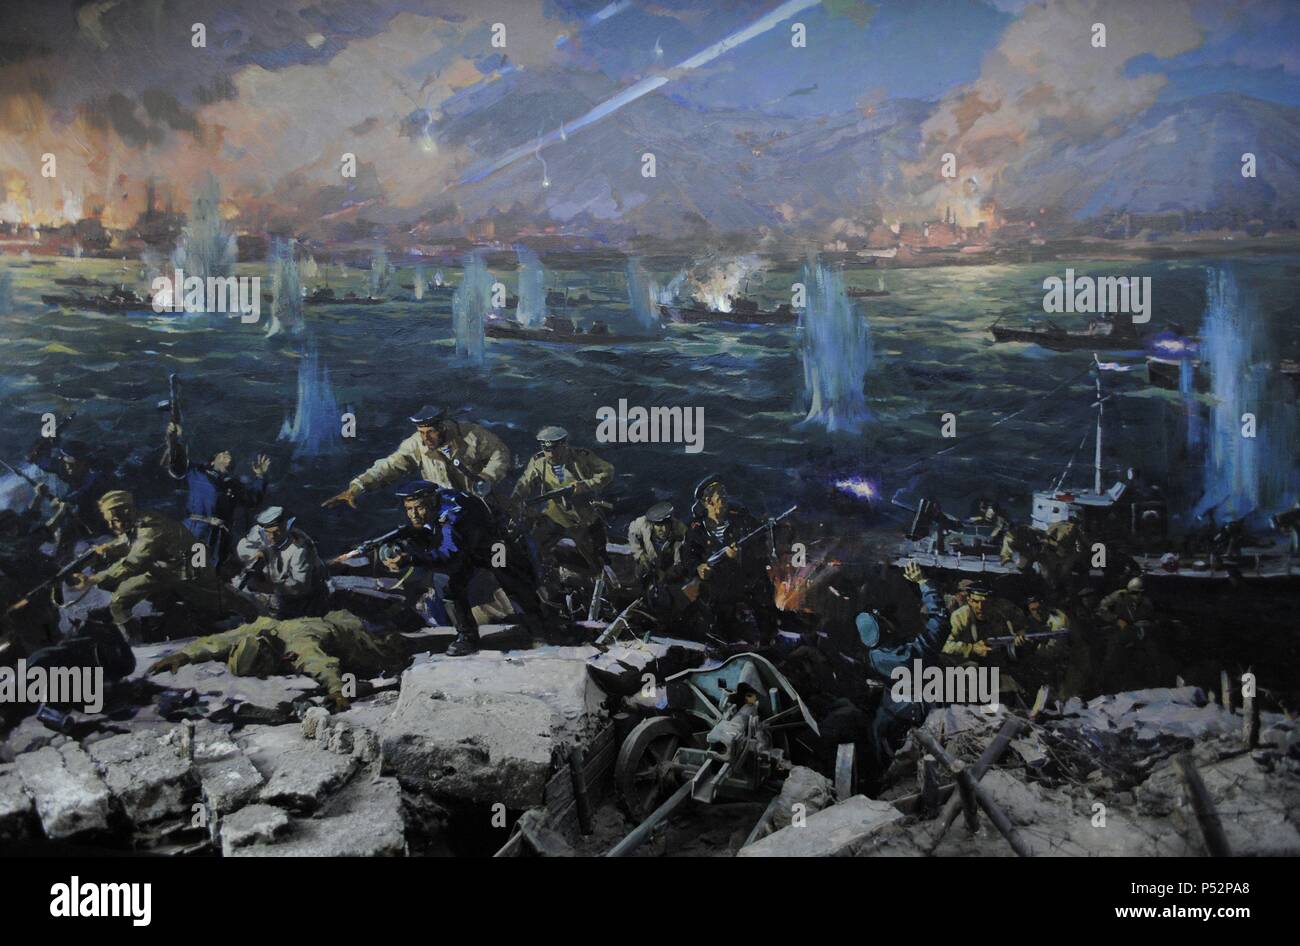 World War II. Russia. Battle of the Caucasus. Novorossiysk-Taman Strategic Offensive Operation, led by the Chief of Staff Ivan Petrov, in 1943. The Red Army landing on the Taman Peninsula and liberation of Novorossiysk, a Russian city in the Black Sea coast. Painting. Museum of Black Sea Fleet. Sevastopol. Ukraine. Stock Photo